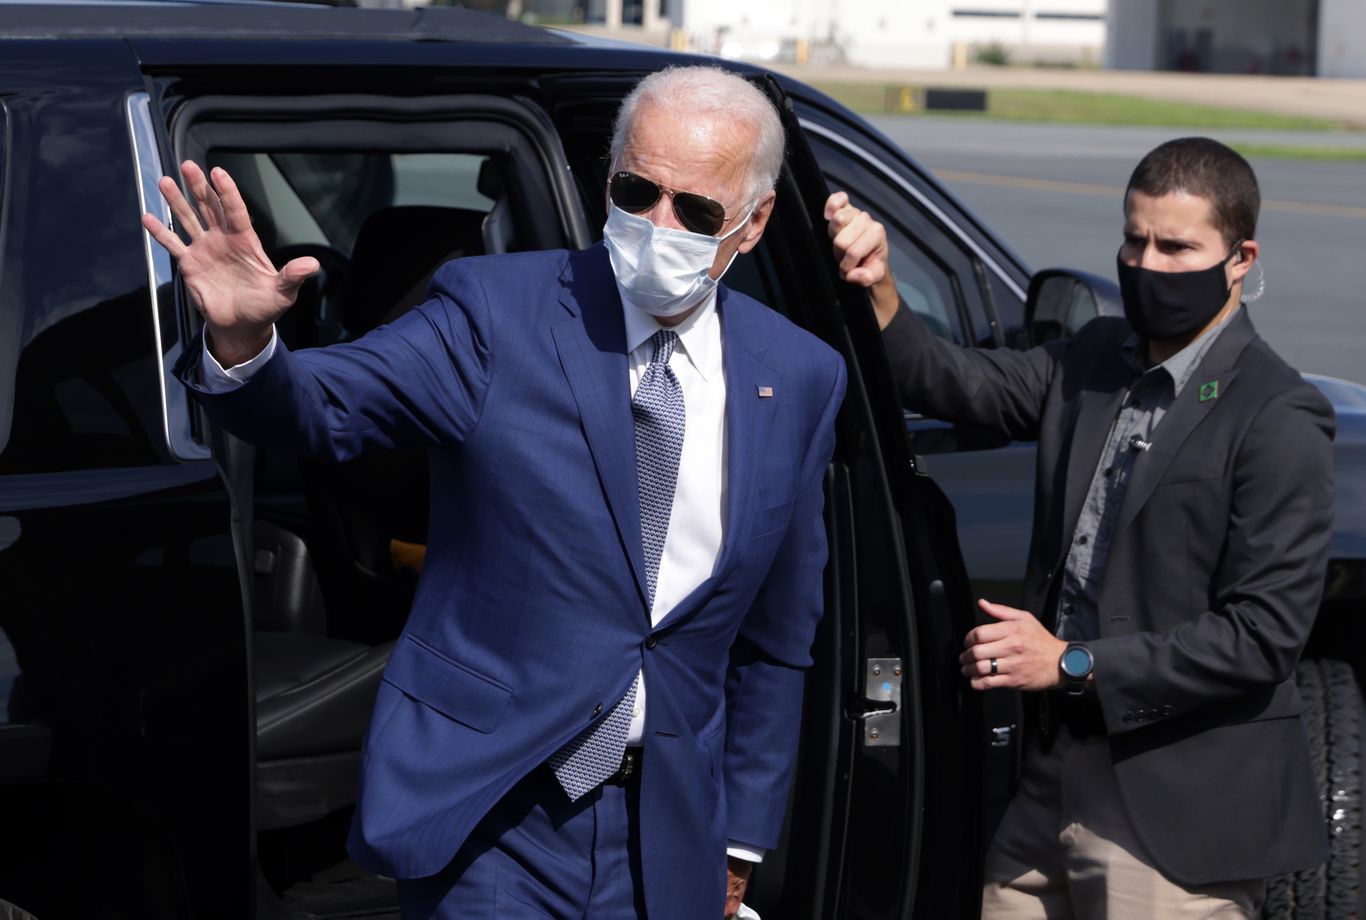 Biden says he spoke with Jacob Blake by phone for 15 minutes thumbnail